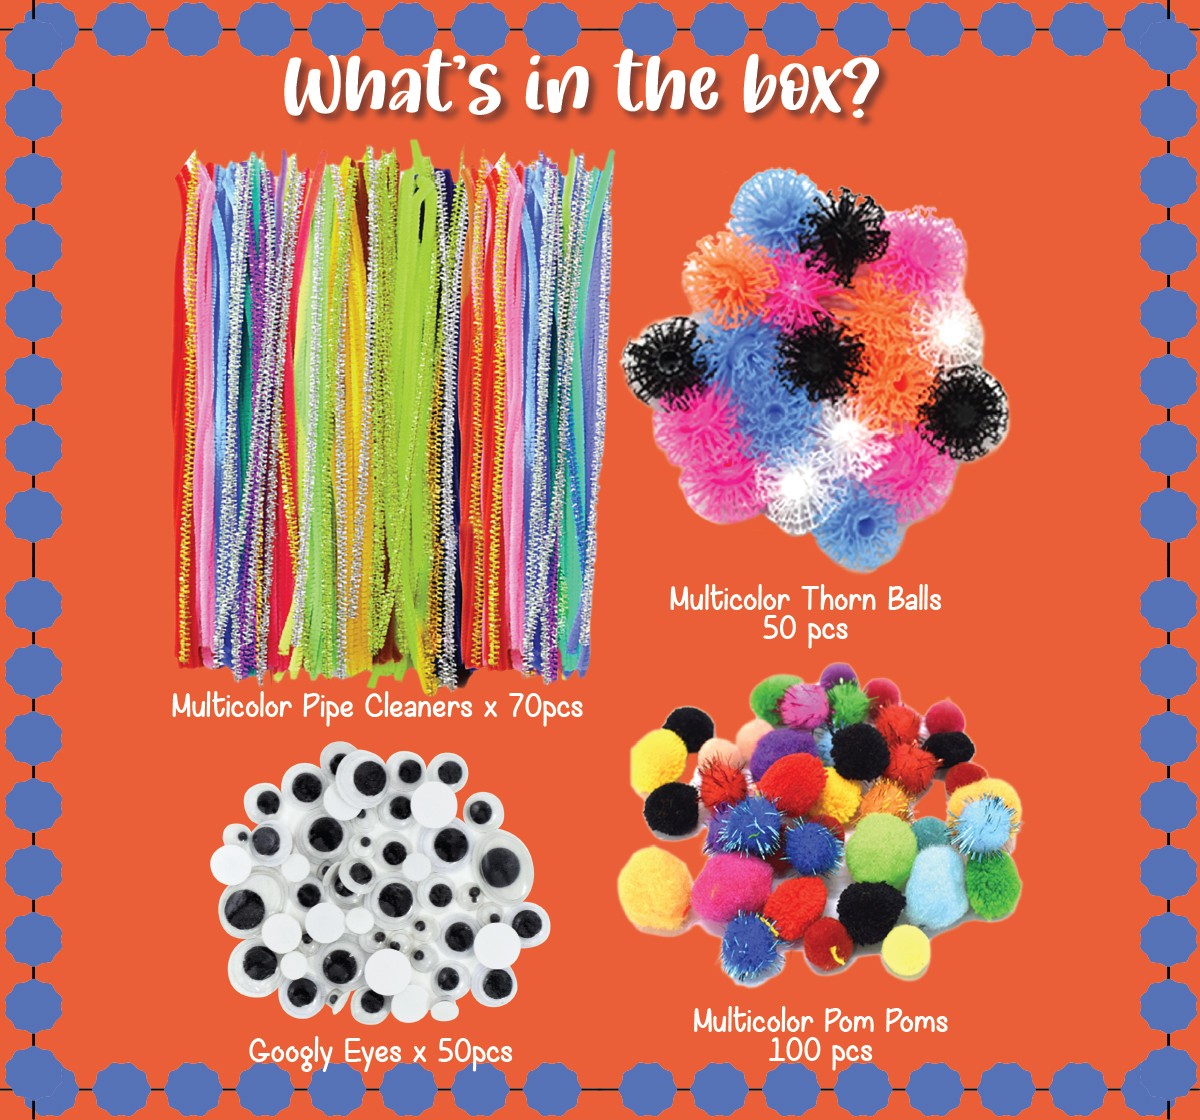 Kalakaram Pom Pom Crafts Kit for Kids, DIY Fun Activity for Kids 5 Year Old, DIY Hobby Crafts for Kids, Pom Pom Activity Kits, Multi Color, Art Craft Kit for Kids, 5Y+, Multicolour